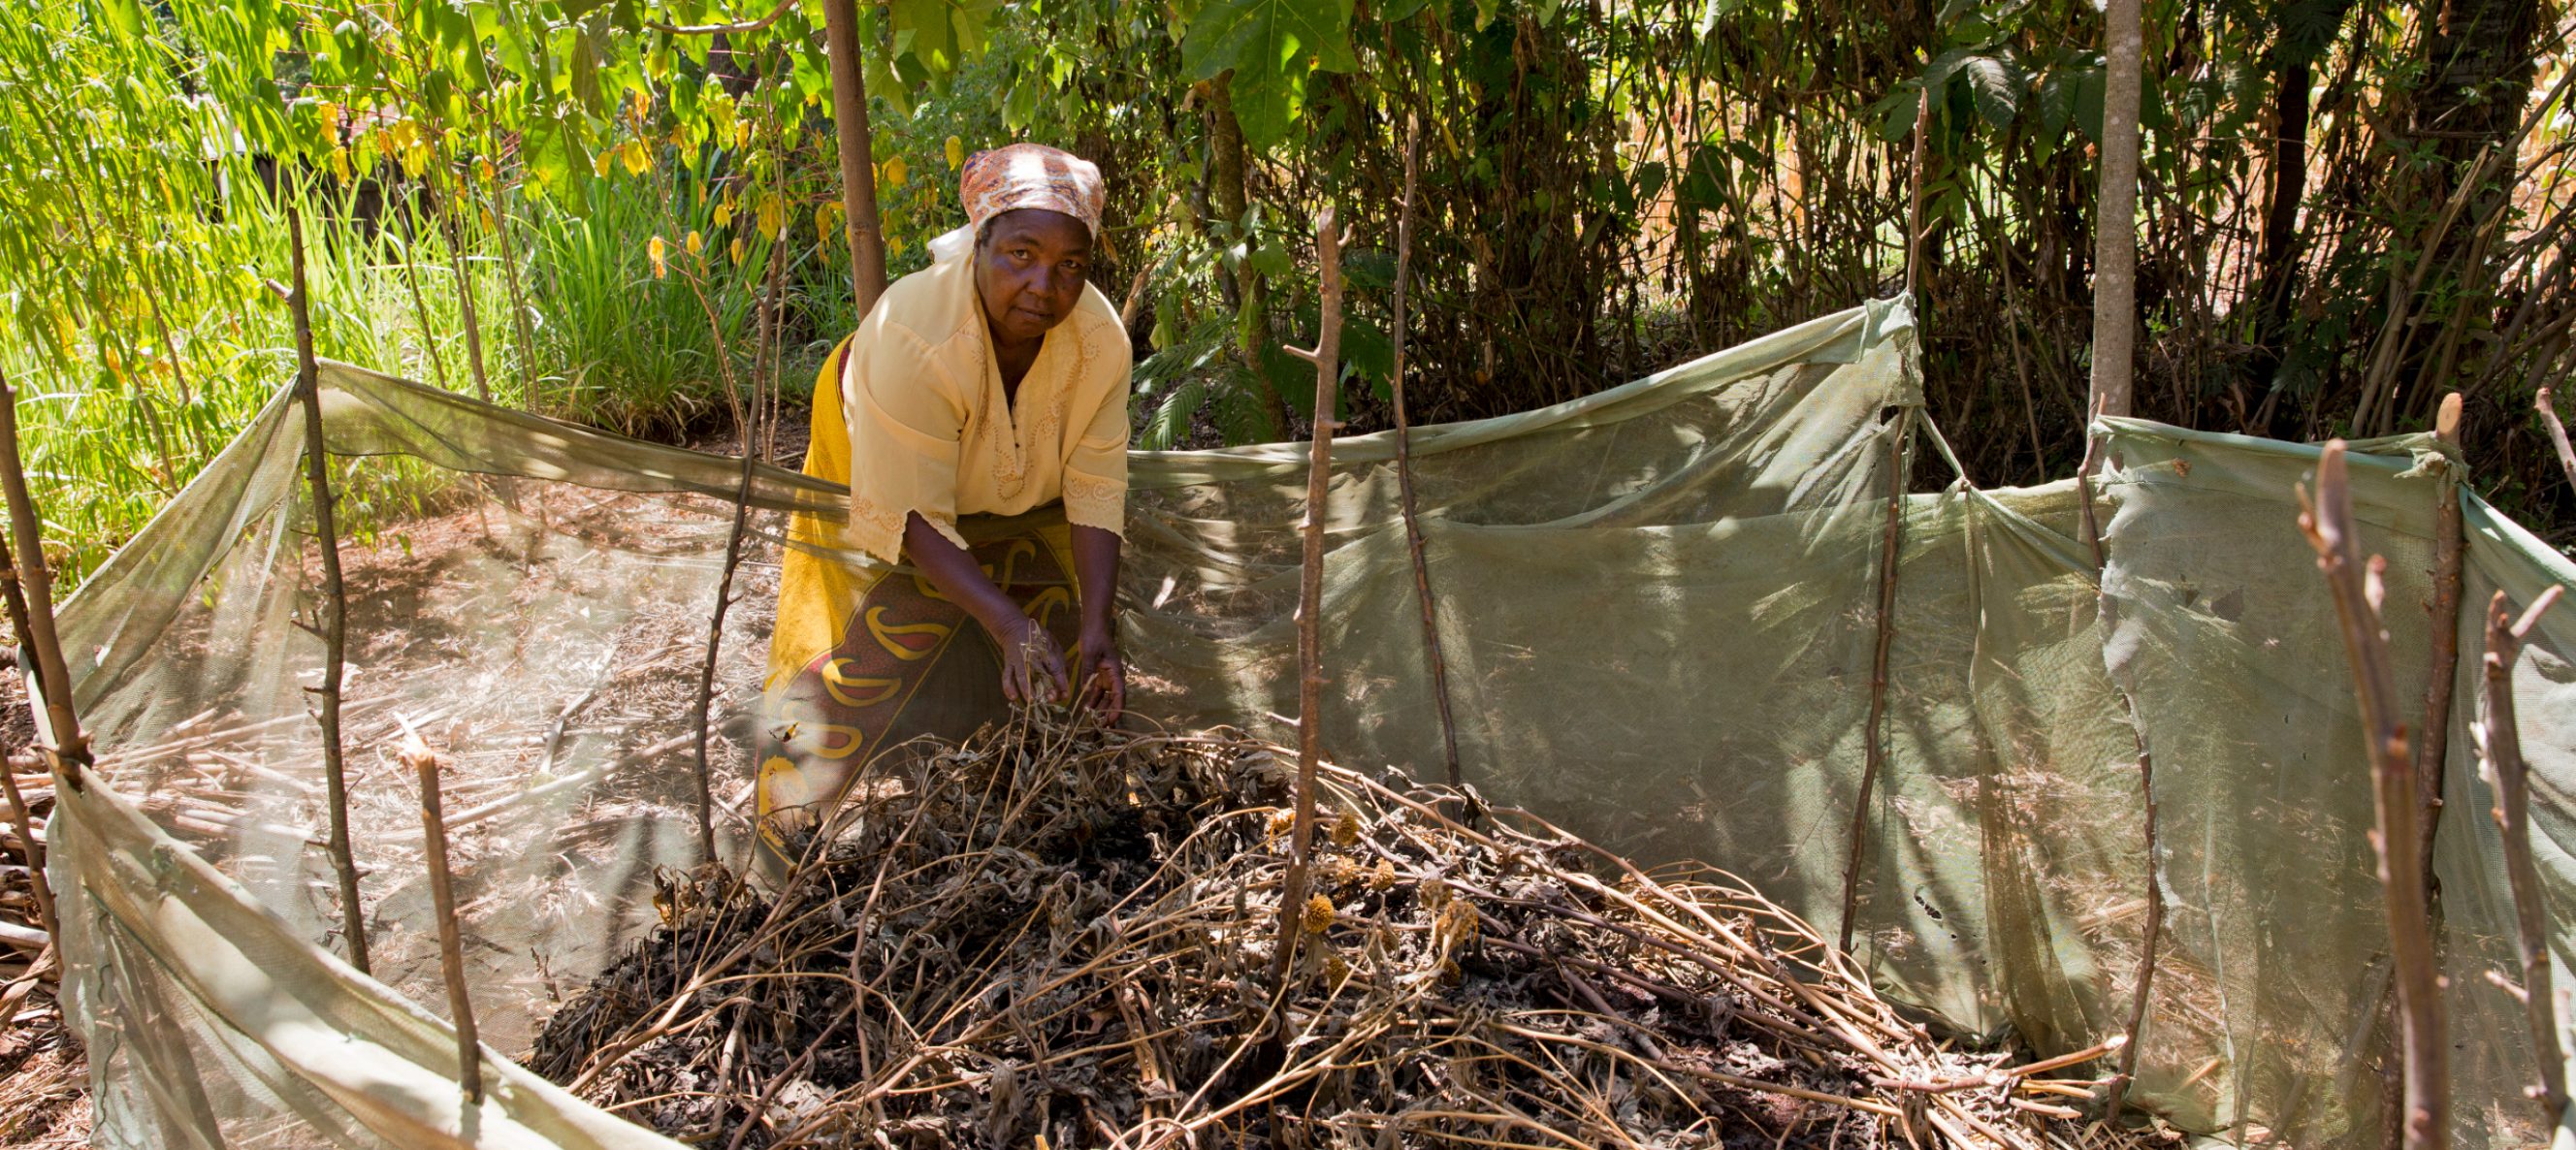 The compost facility is an essential part of her organic farm.